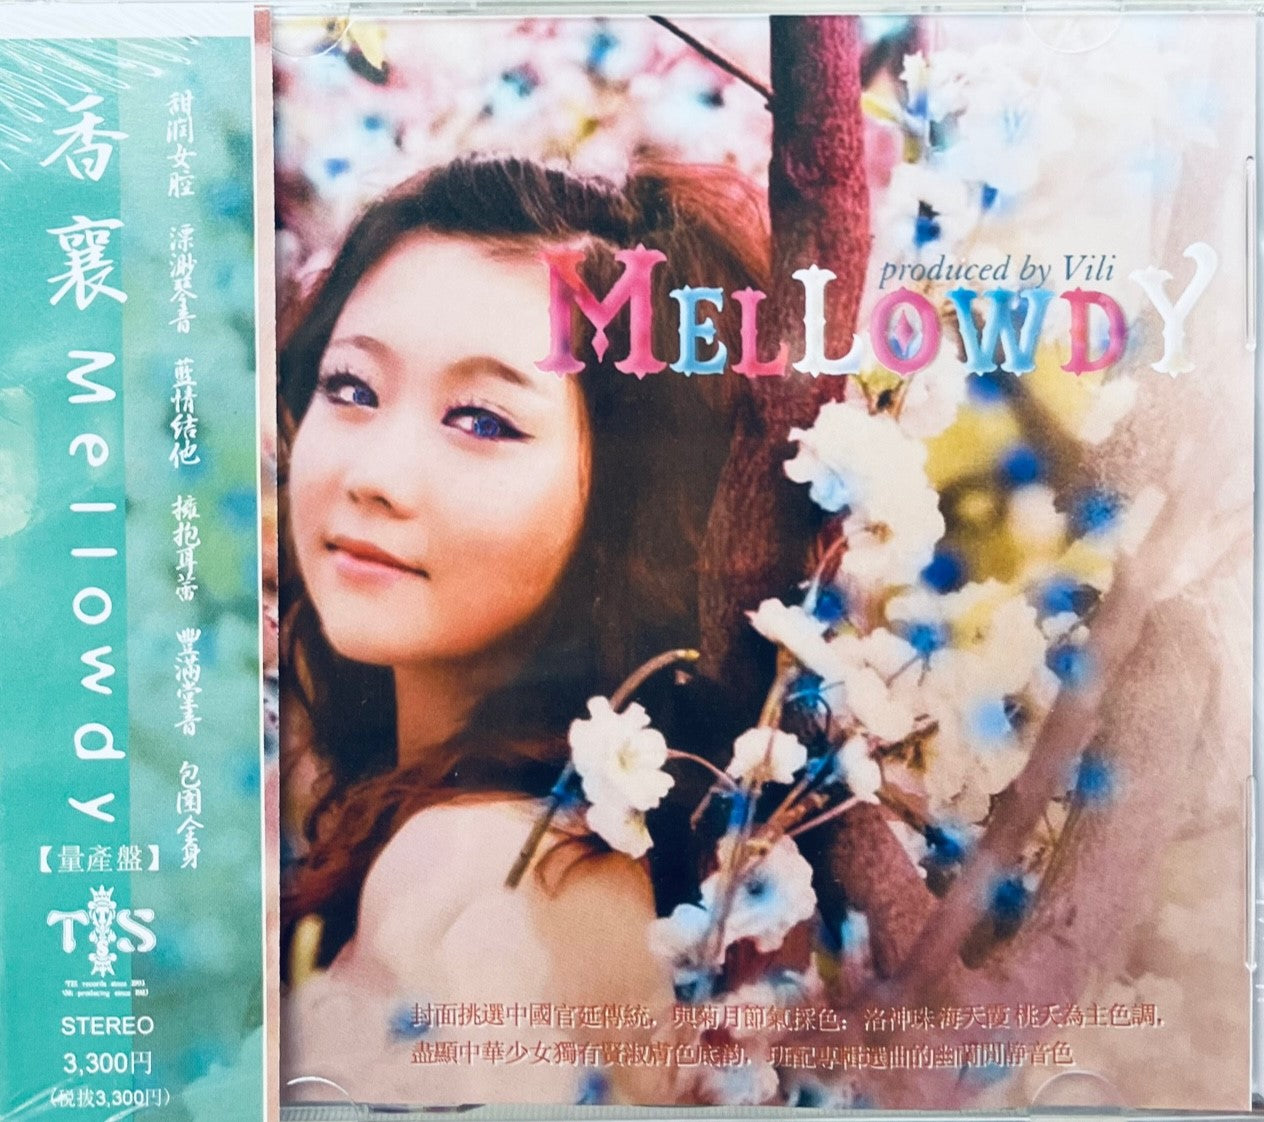 MELLOWDY PRODUCED BY VILI -  TIS LABEL (CD)